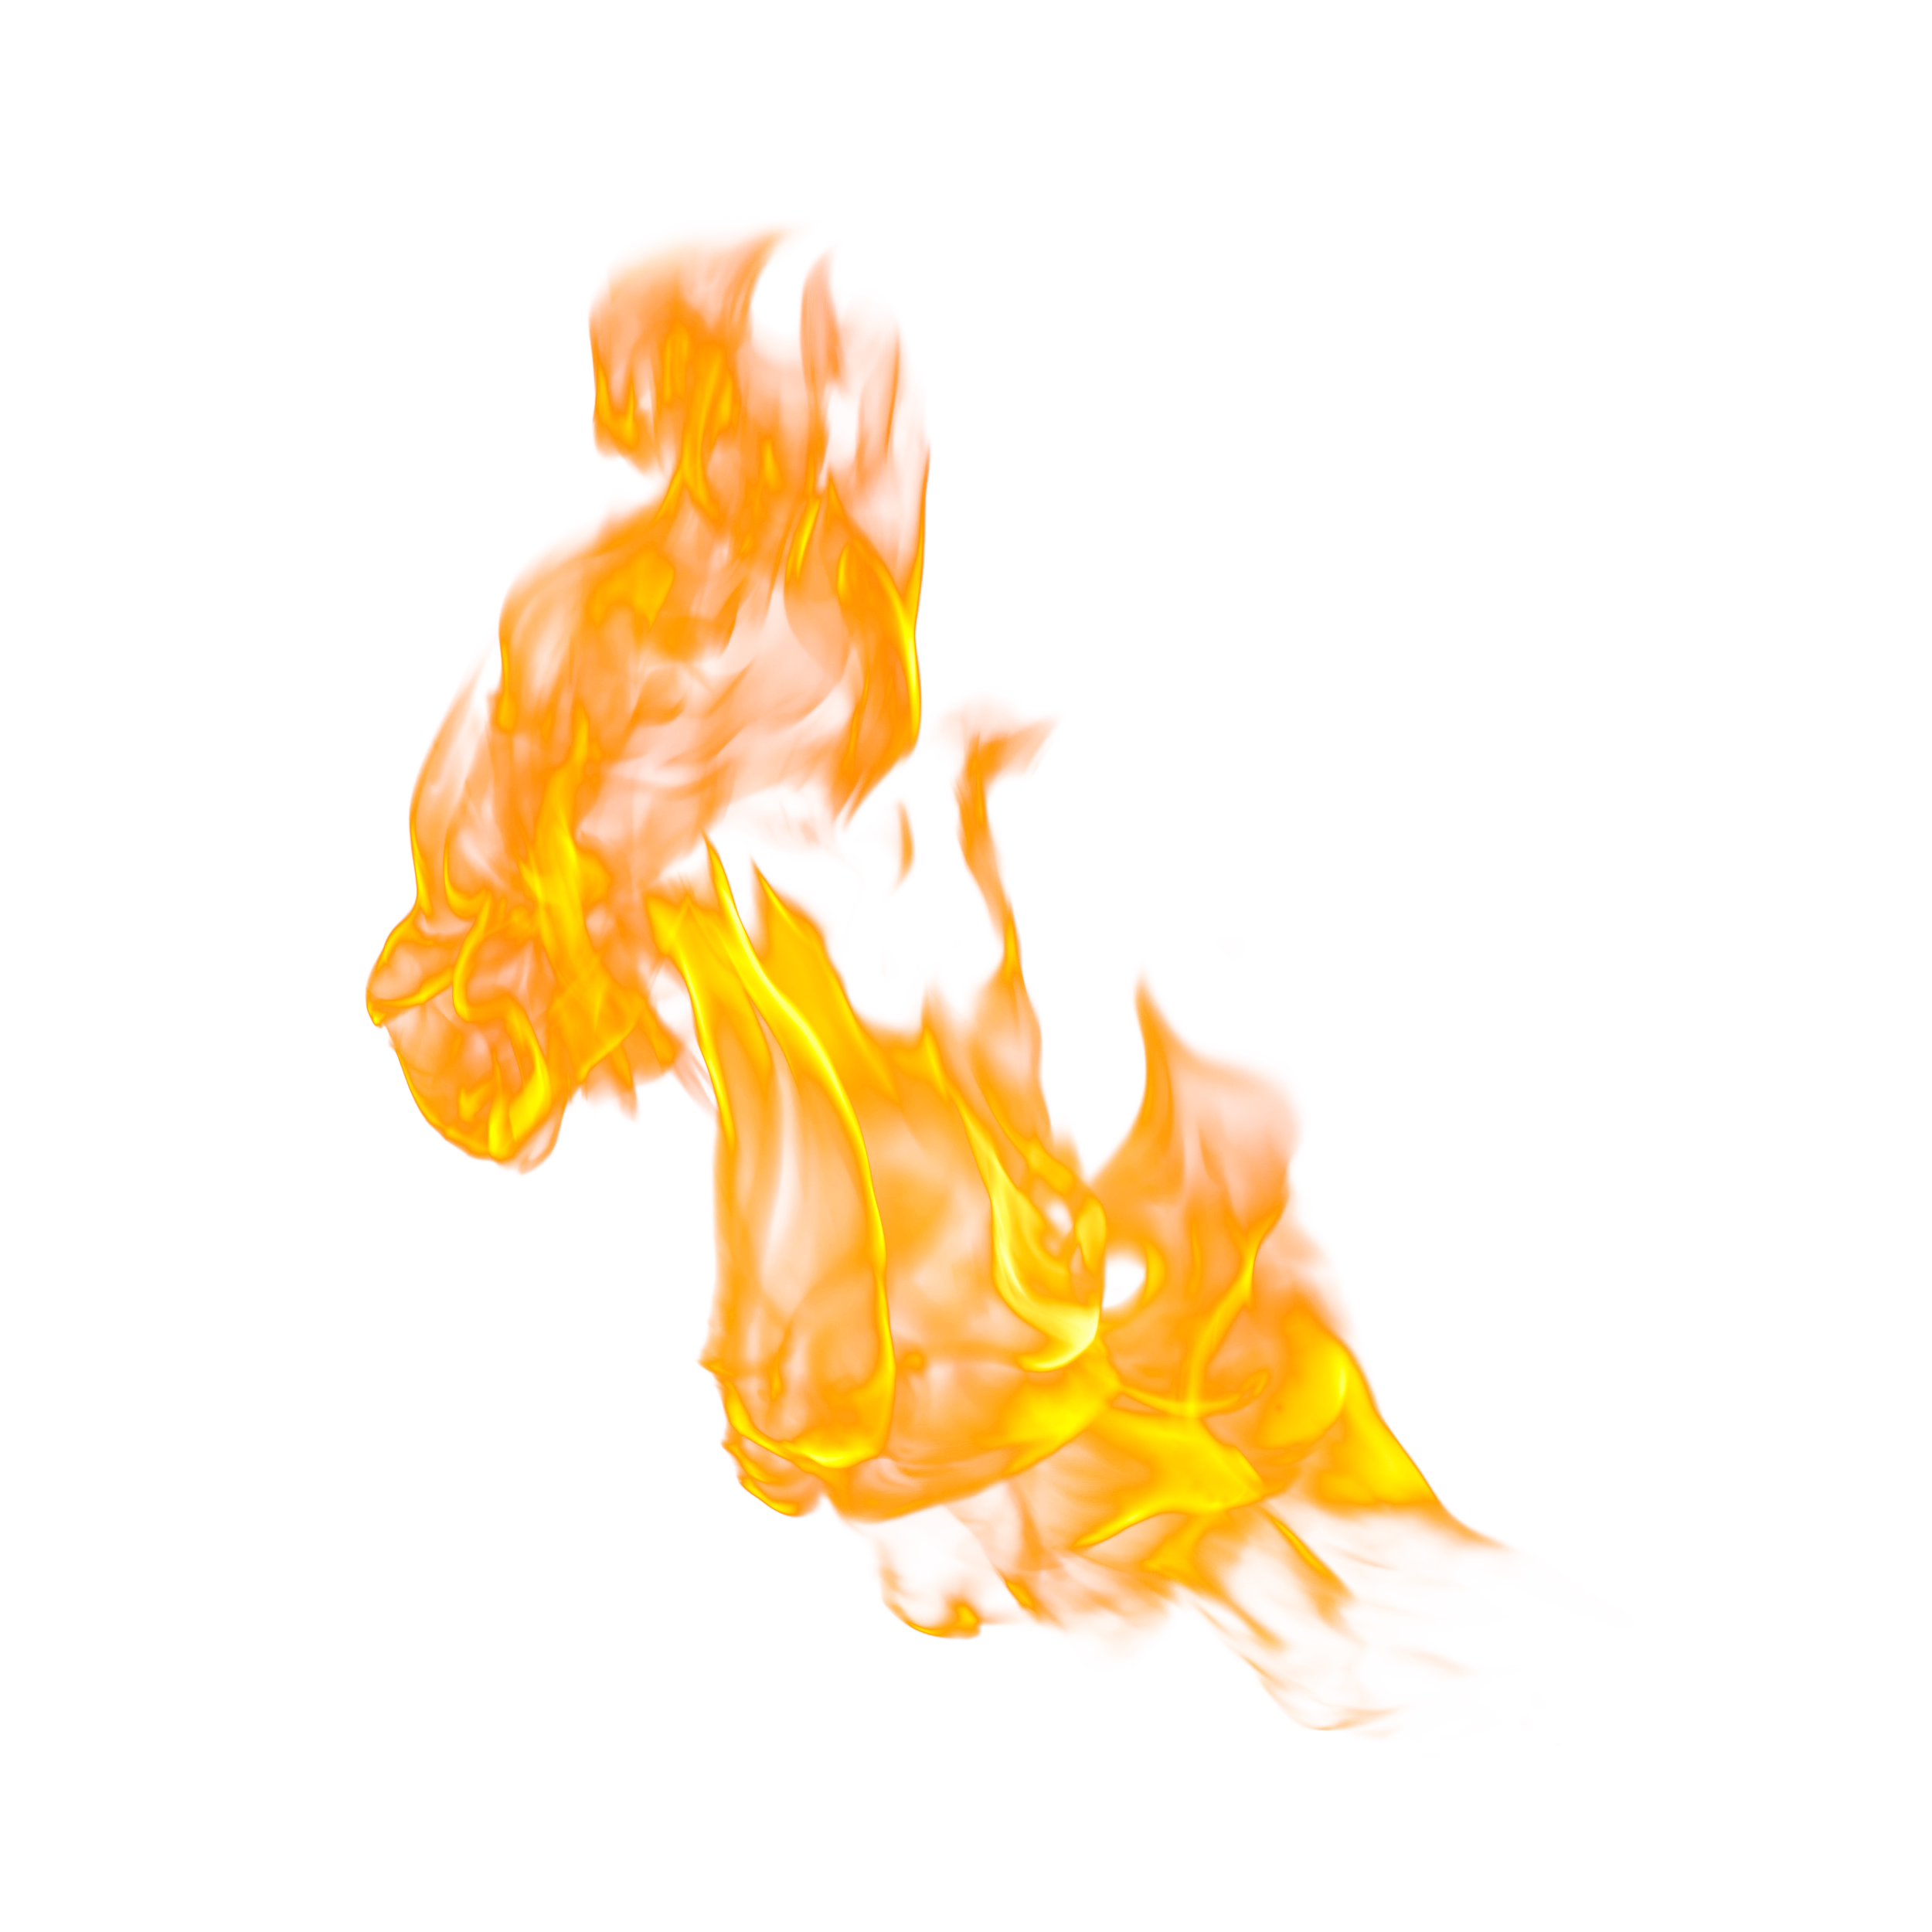 Flame Fire Combustion Yellow - Yellow background vibrant flame,Cool ...